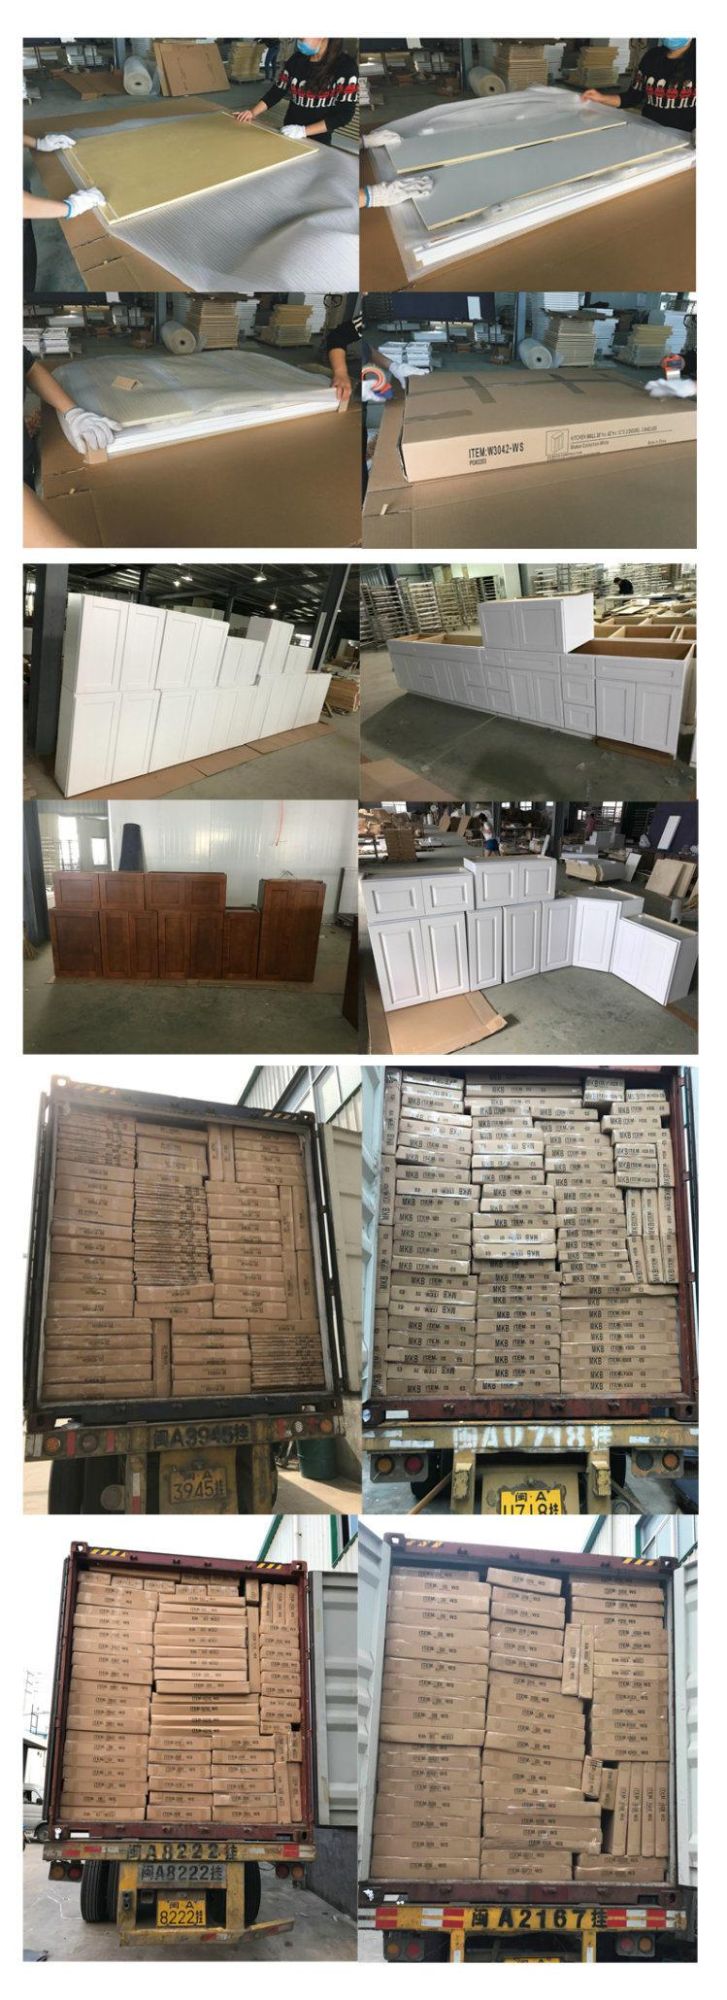 Chinese Manufacturer Making All Wood American Kitchen Island Cabinets